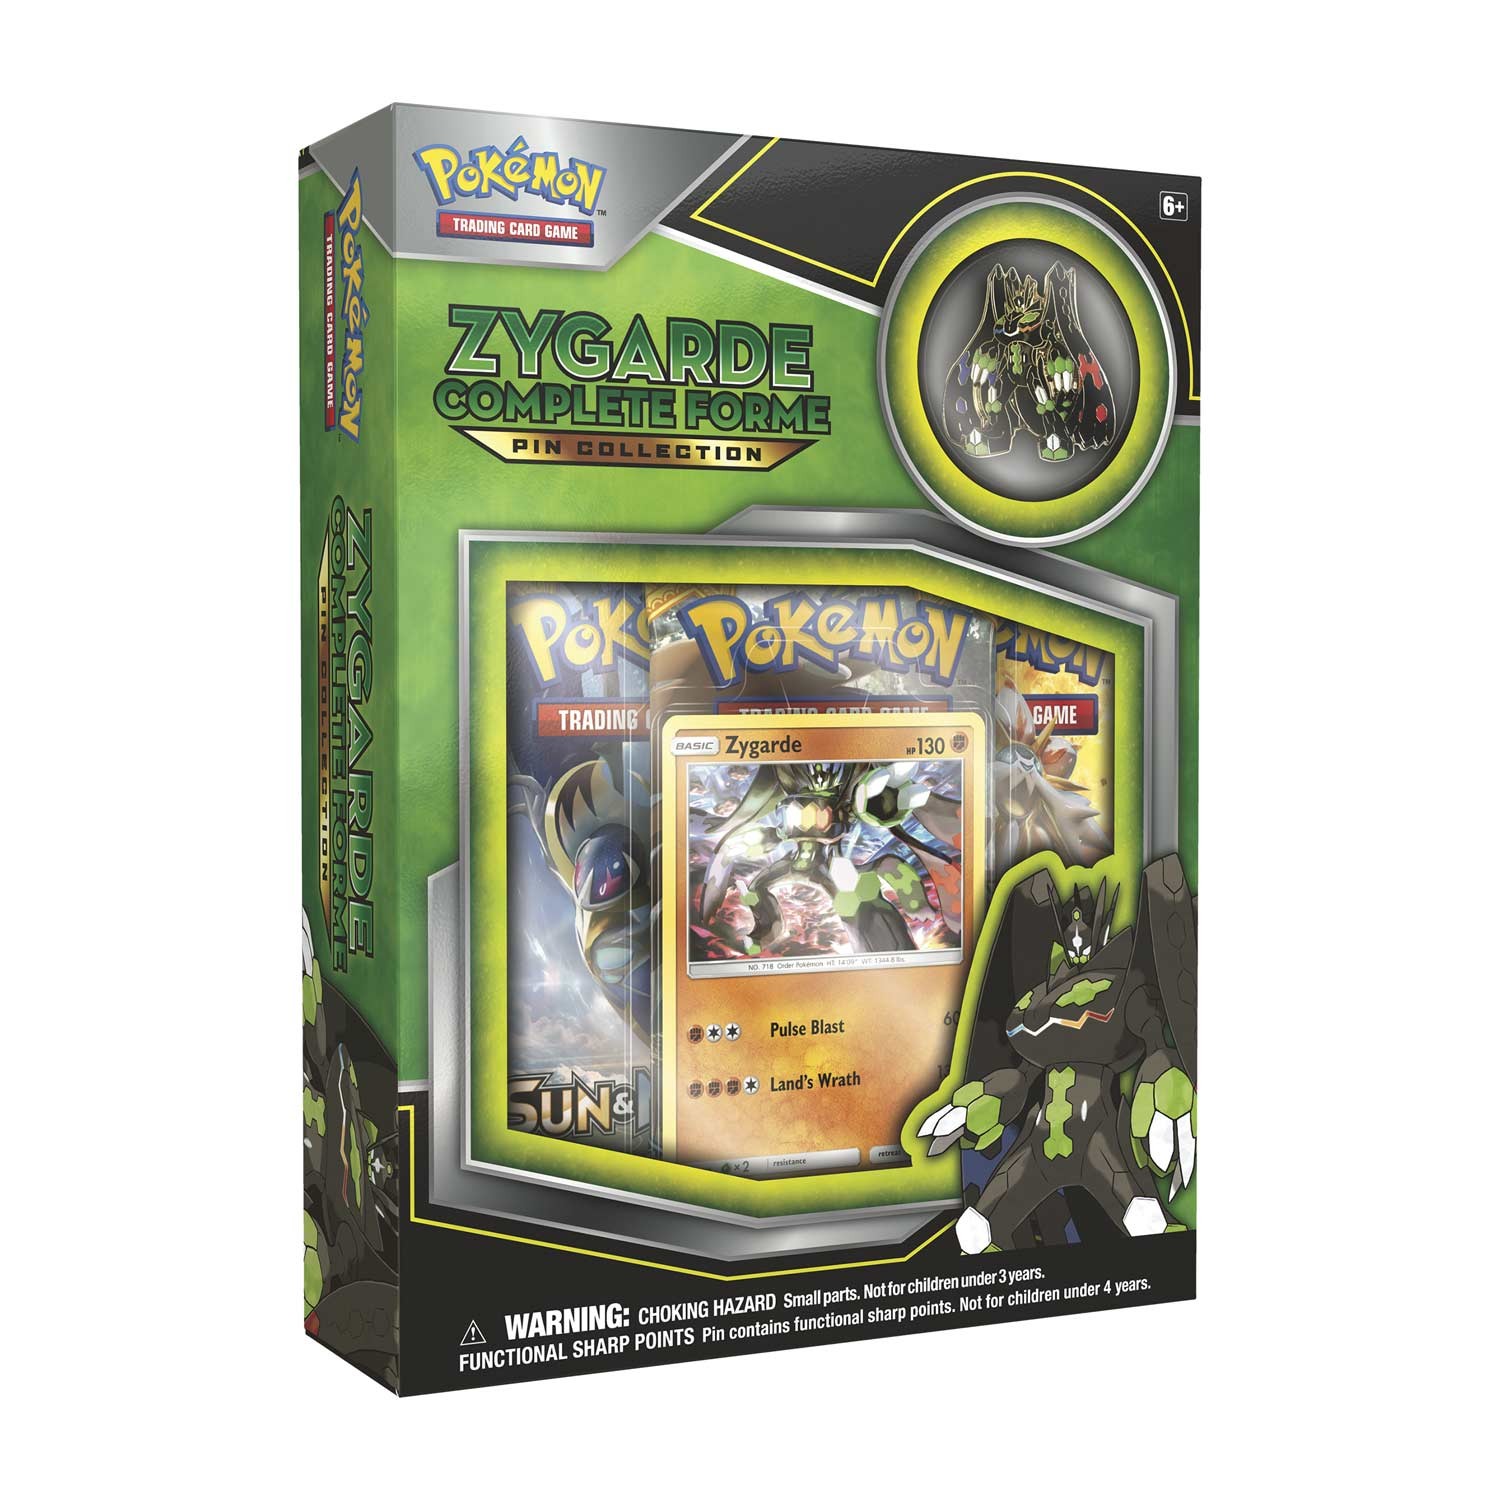 Pokémon TCG: Zygarde Complete Form Pin Collection